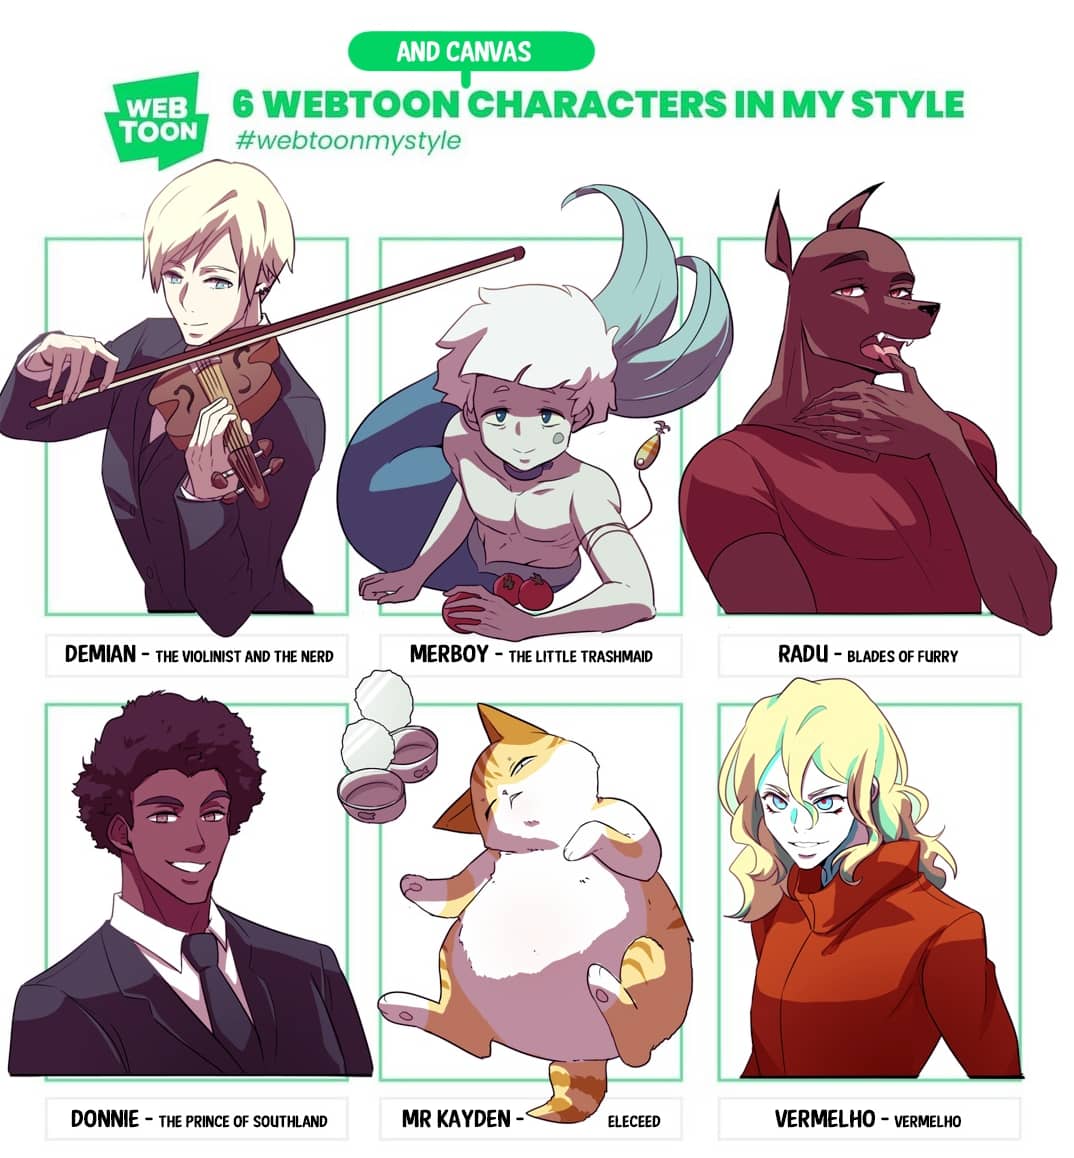 I saw this meme going around on social media and wanted to make it too since there are sooo many great Webtoon and Webtoon canvas characters out there!! 